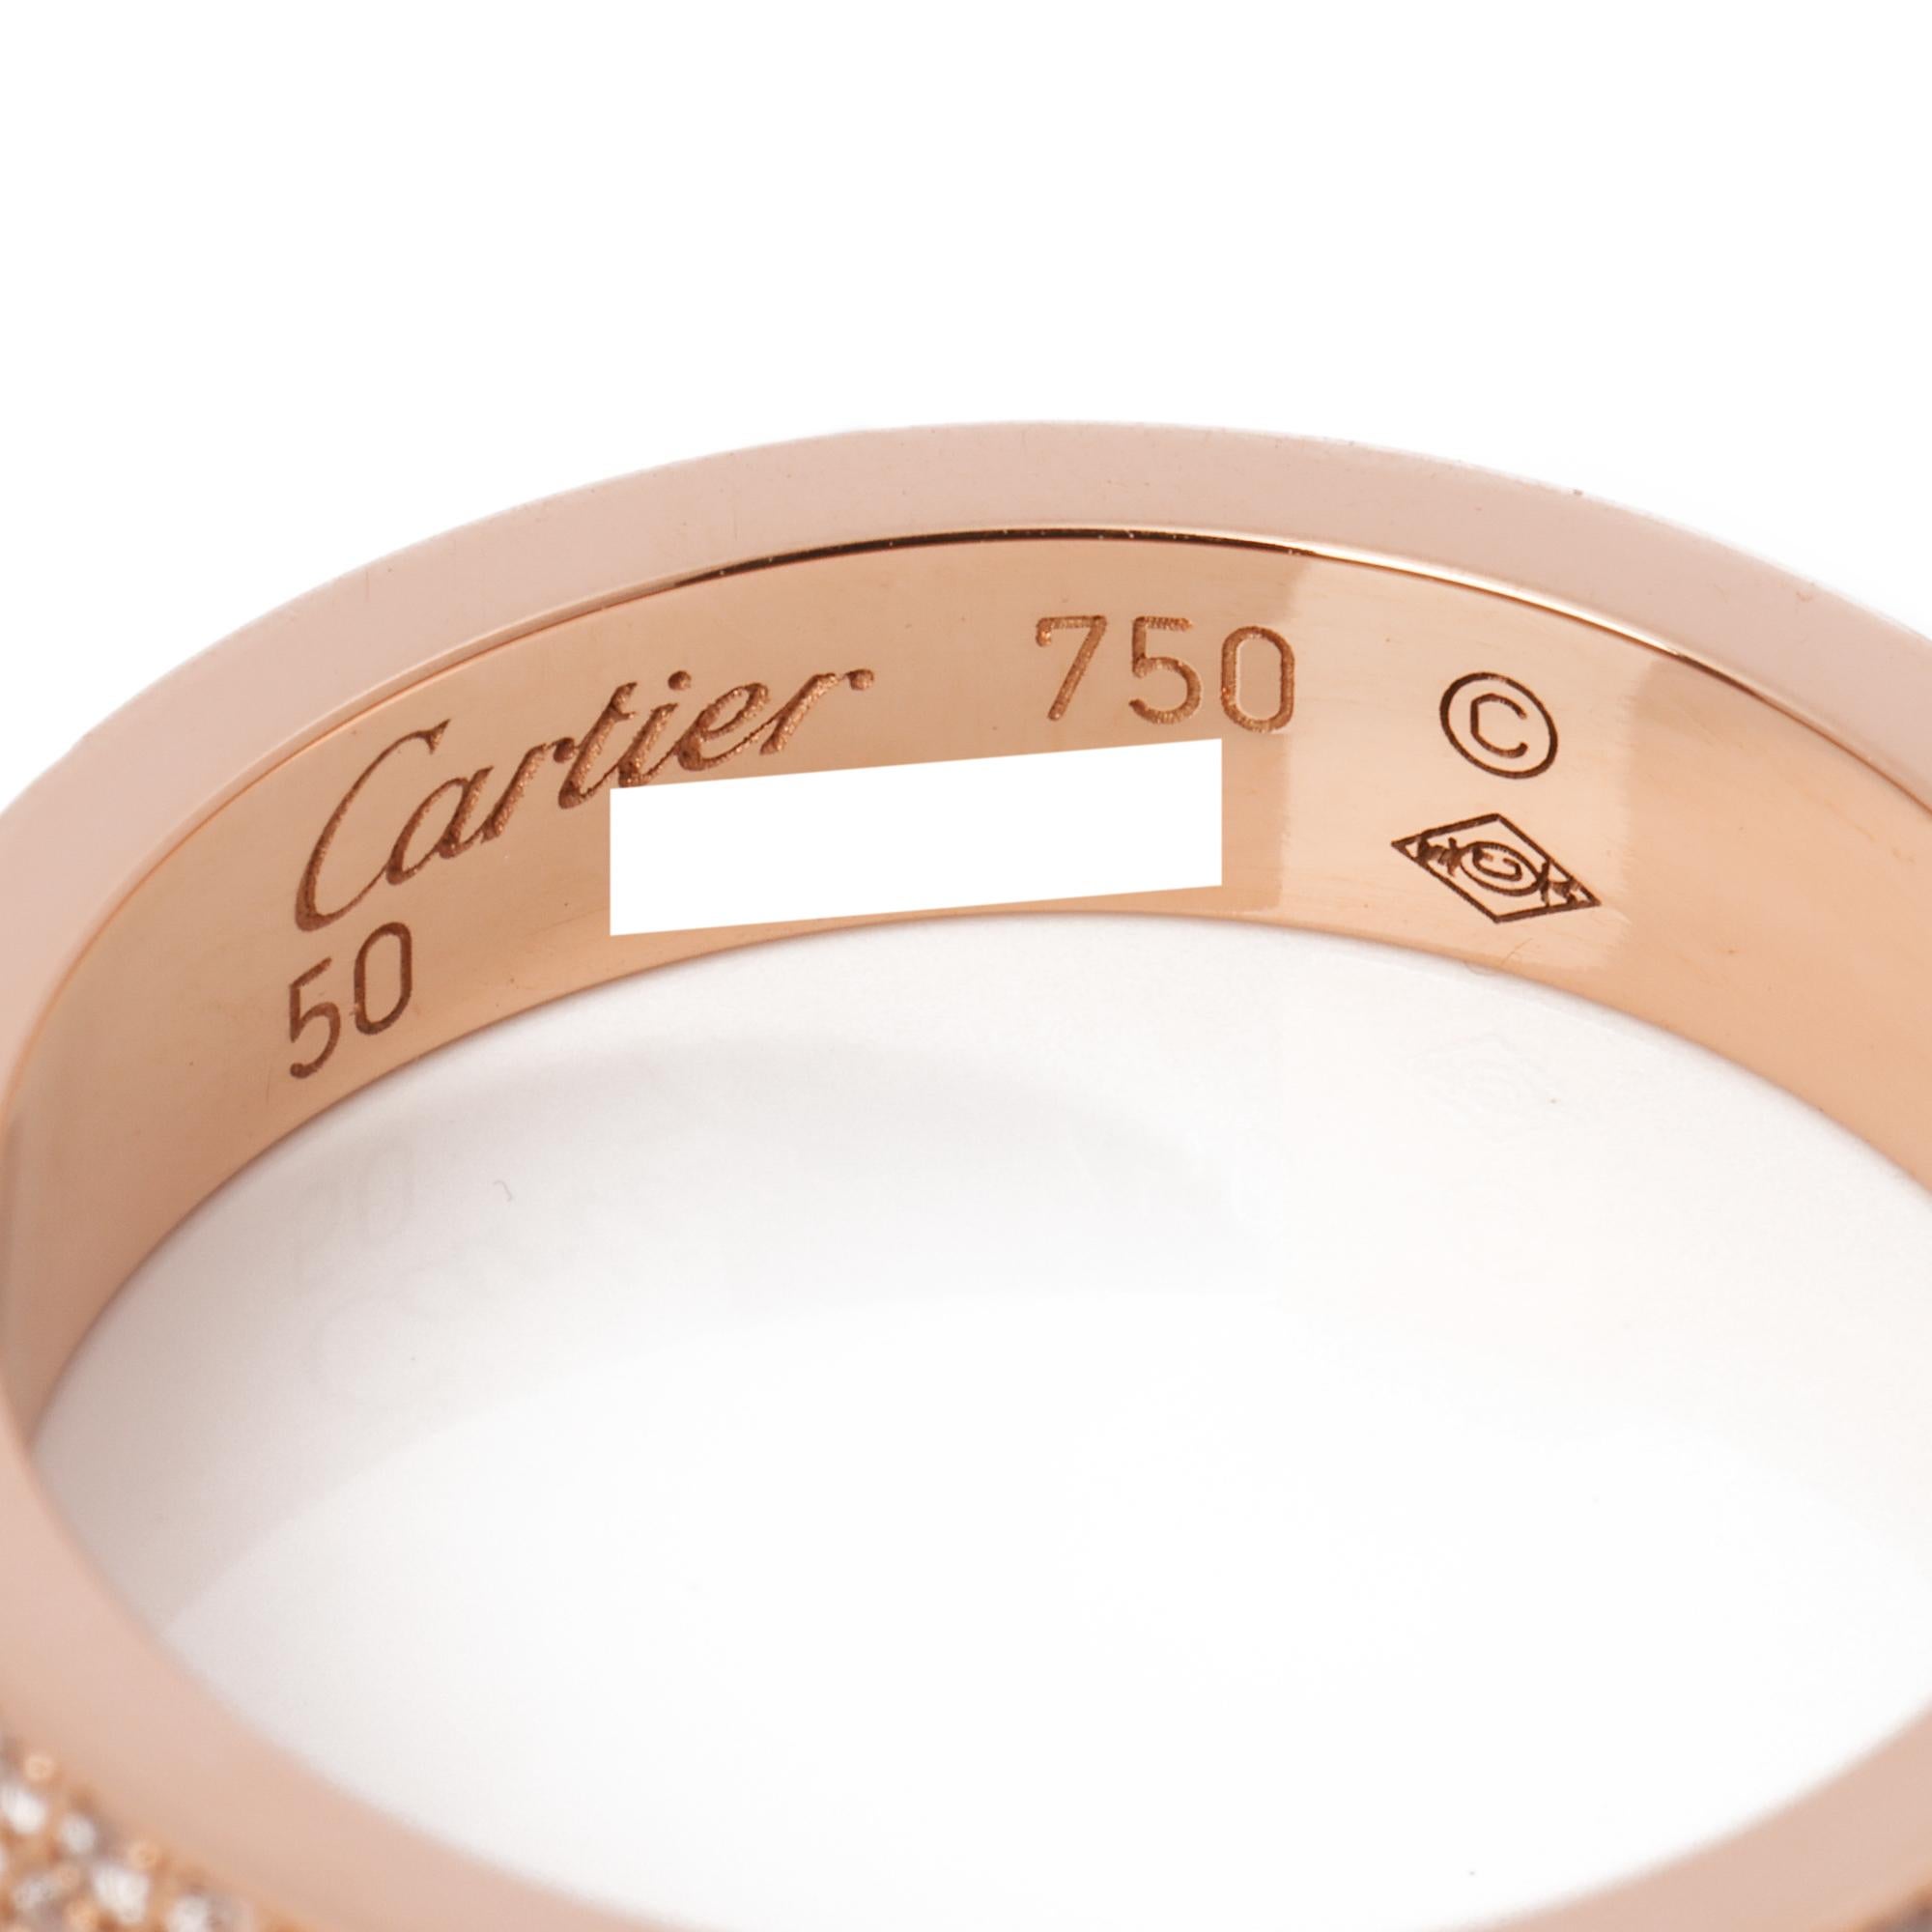 Cartier Pave Diamond 18ct Rose Gold Medium Love Wedding Band Ring

Brand Cartier
Model Pave Medium Love Ring
Product Type Ring
Serial Number ZE****
Accompanied By Cartier Box, Certificate
Material(s) 18ct Rose Gold
Gemstone Diamond
UK Ring Size K
EU